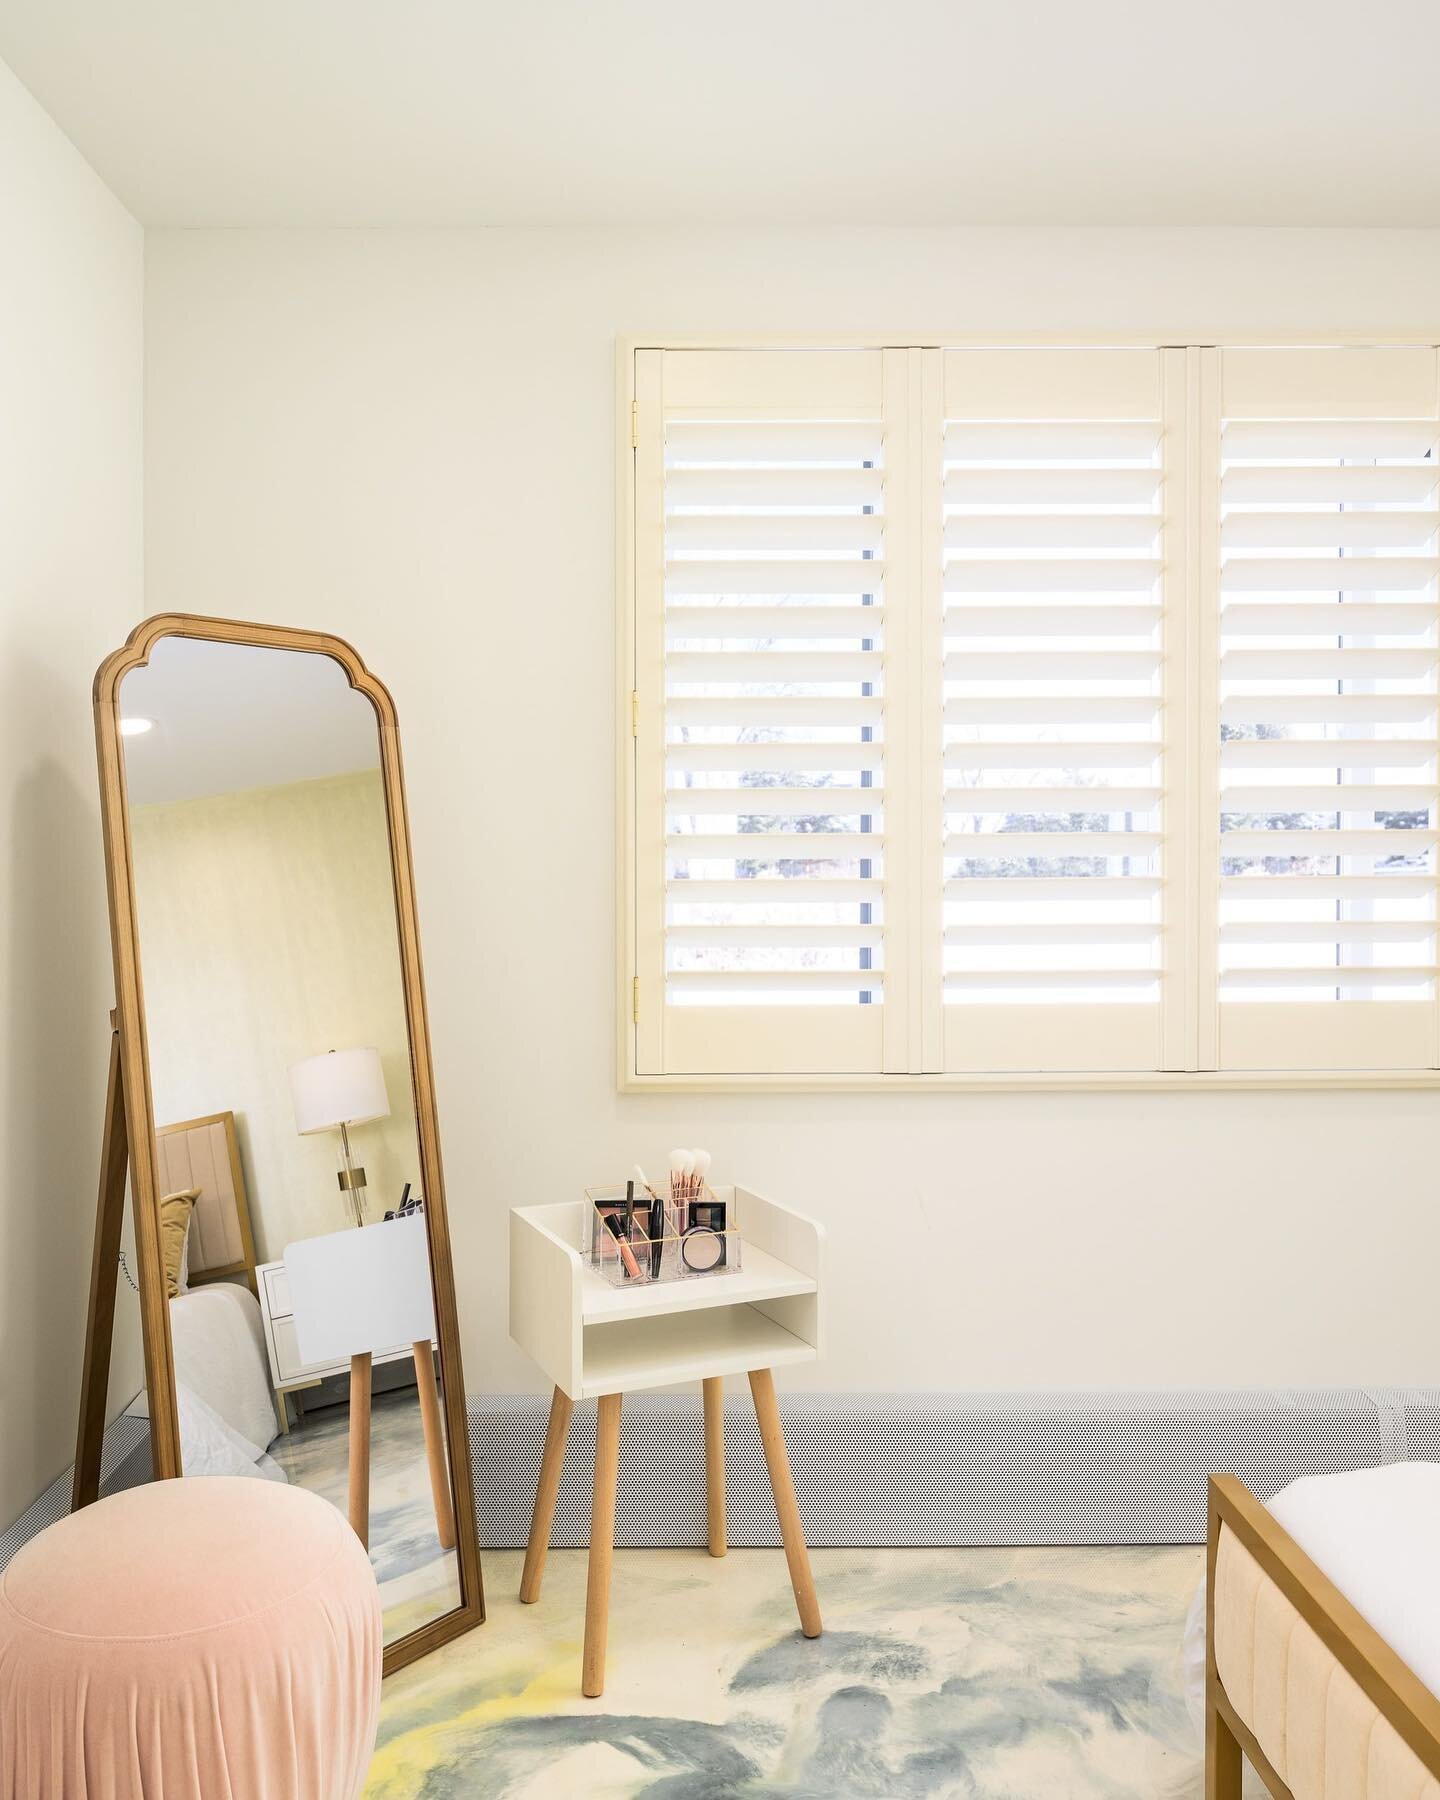 Check out this room designed by the awesome Rico Le&oacute;n from HGTV&rsquo;s Rico to the Rescue. How great is the dimension added to the space simply by selecting our dover shutters instead of white? It&rsquo;s the little things! 🤍@rico.to.the.res